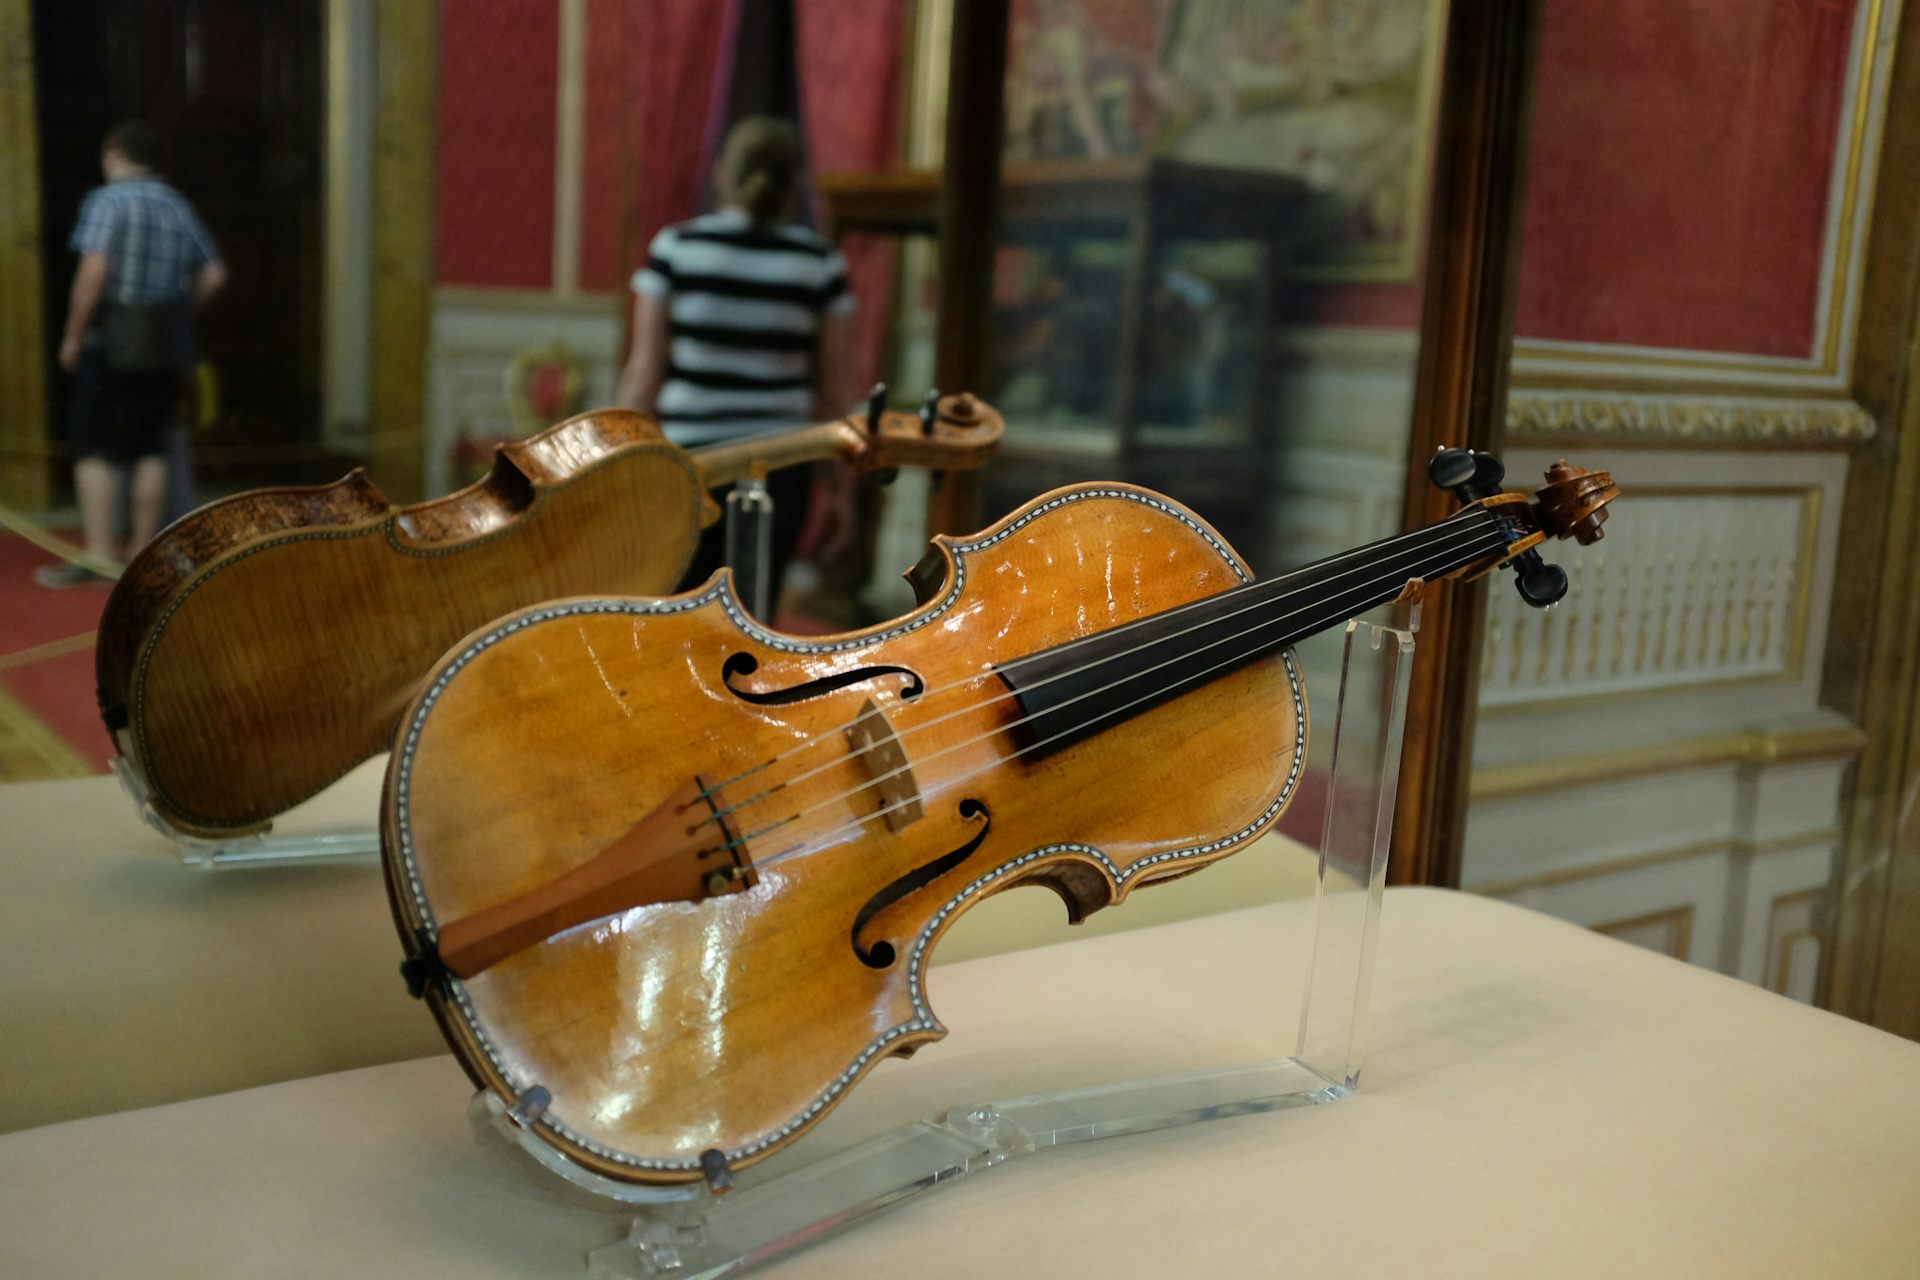 Scientists are trying to uncover what makes Stradivarius violins